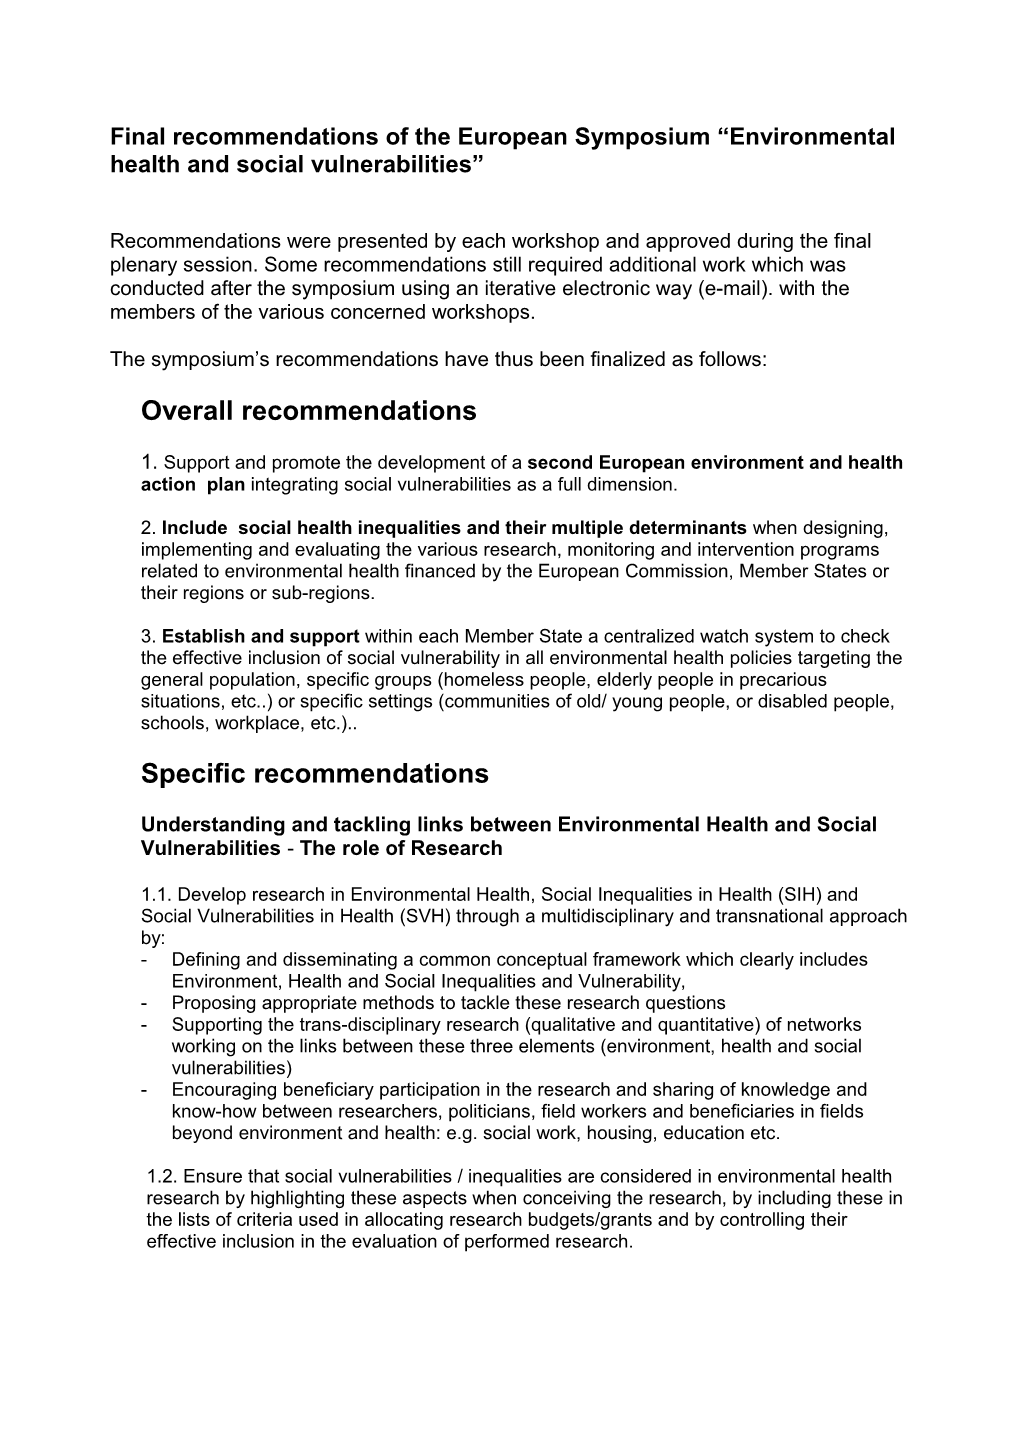 Final Recommendations of the European Symposium Environmental Health and Social Vulnerabilities